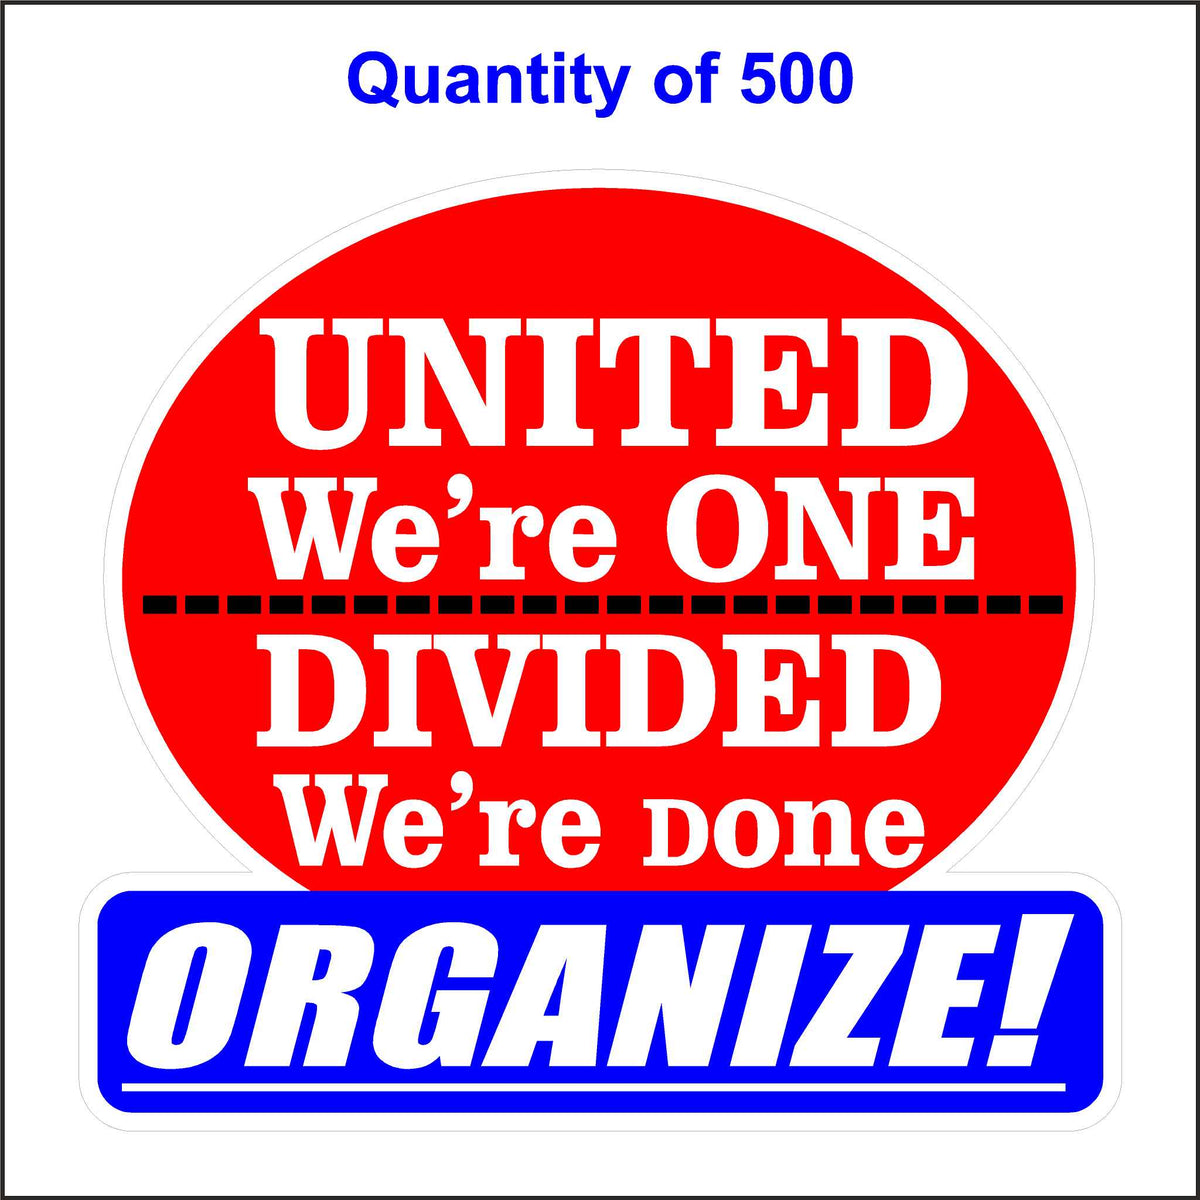 United We Are One Divided We Are Done Organize Stickers. 500 Quantity.